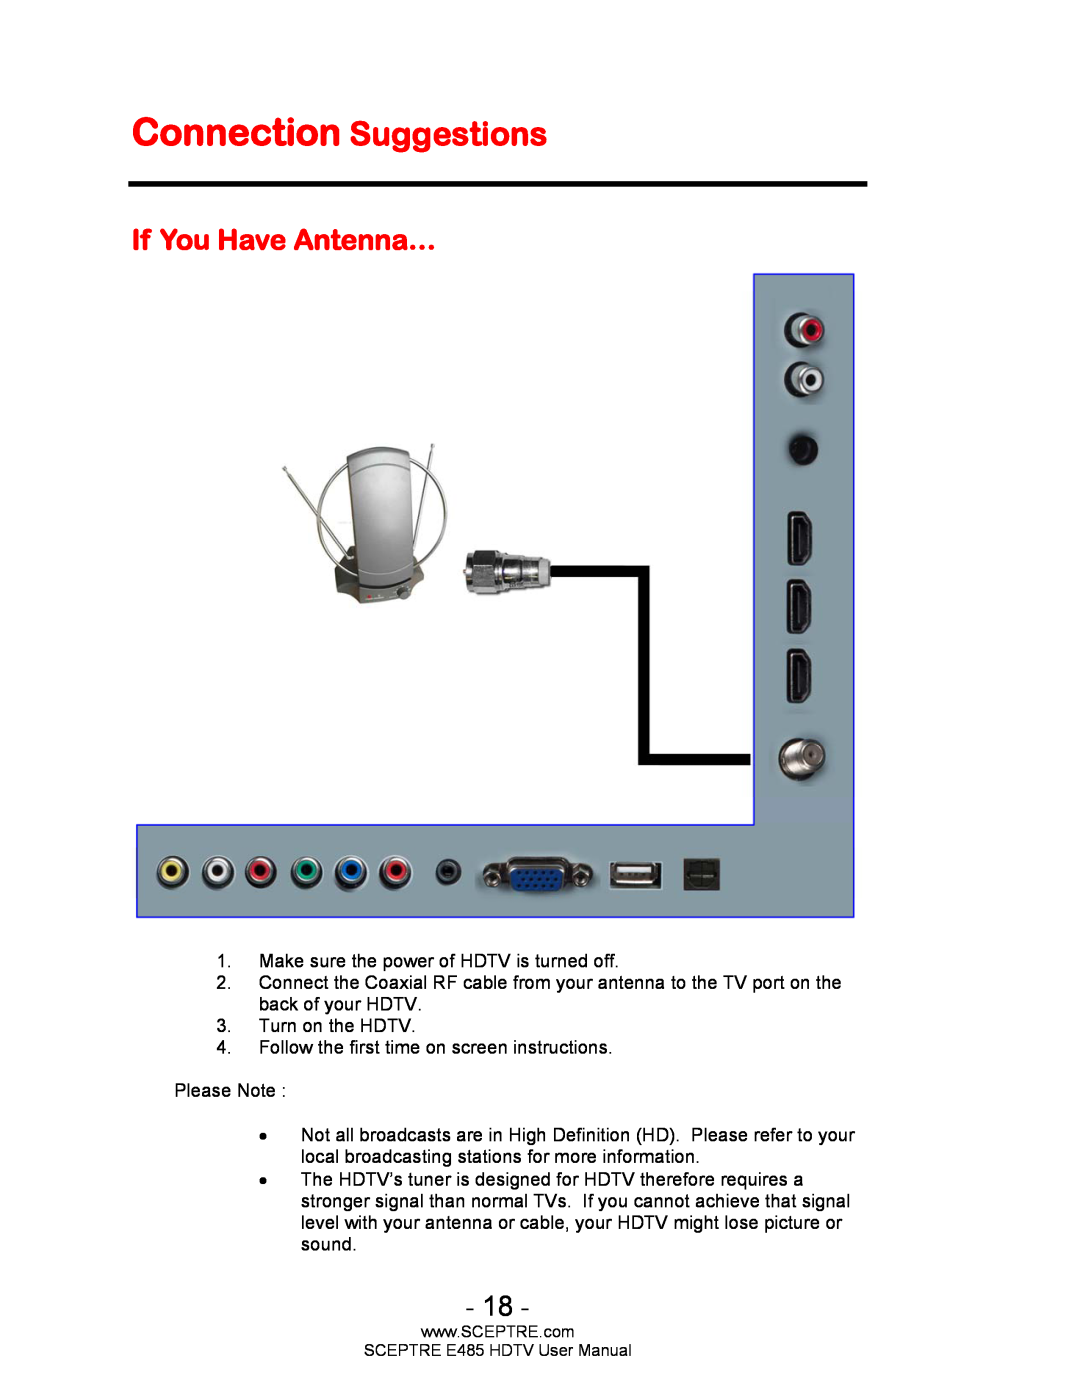 Sceptre Technologies E485 user manual Connection Suggestions, If You Have Antenna… 